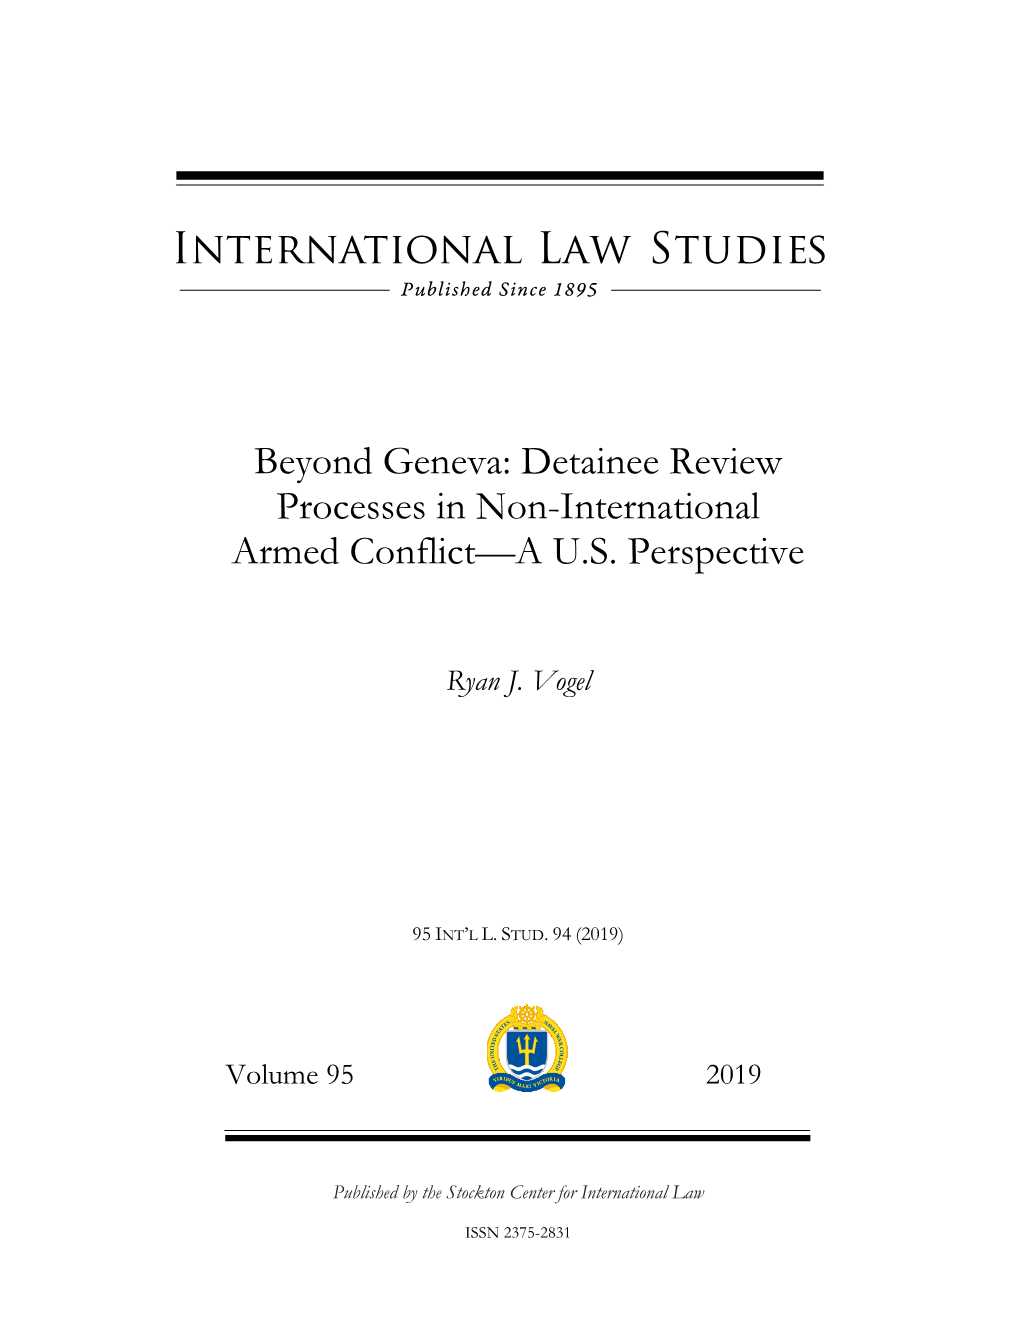 Detainee Review Processes in Non-International Armed Conflict—A US Perspective